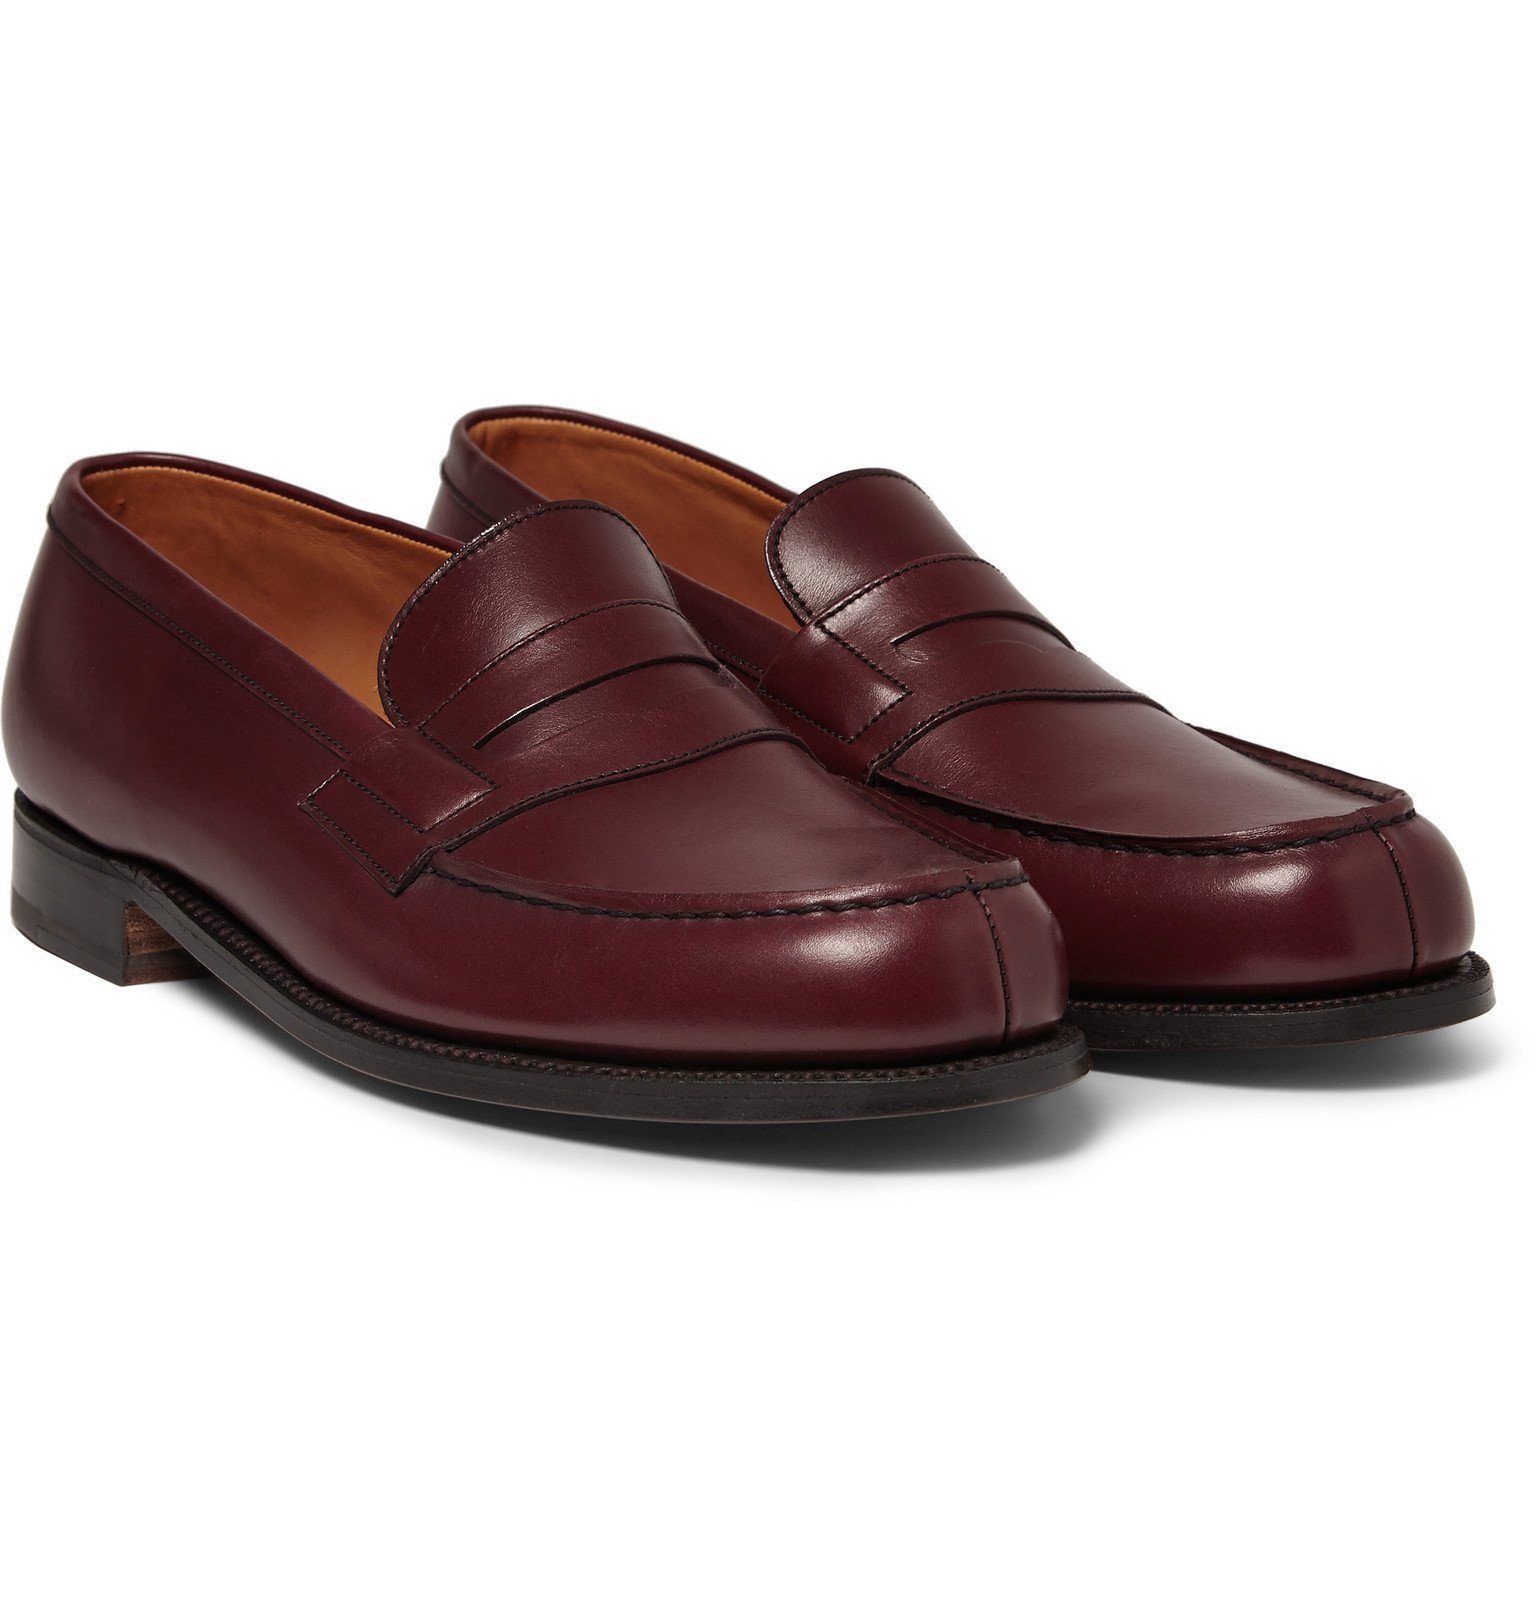 J.M. Weston - 180 The Moccasin Leather Loafers - Burgundy J.M. Weston